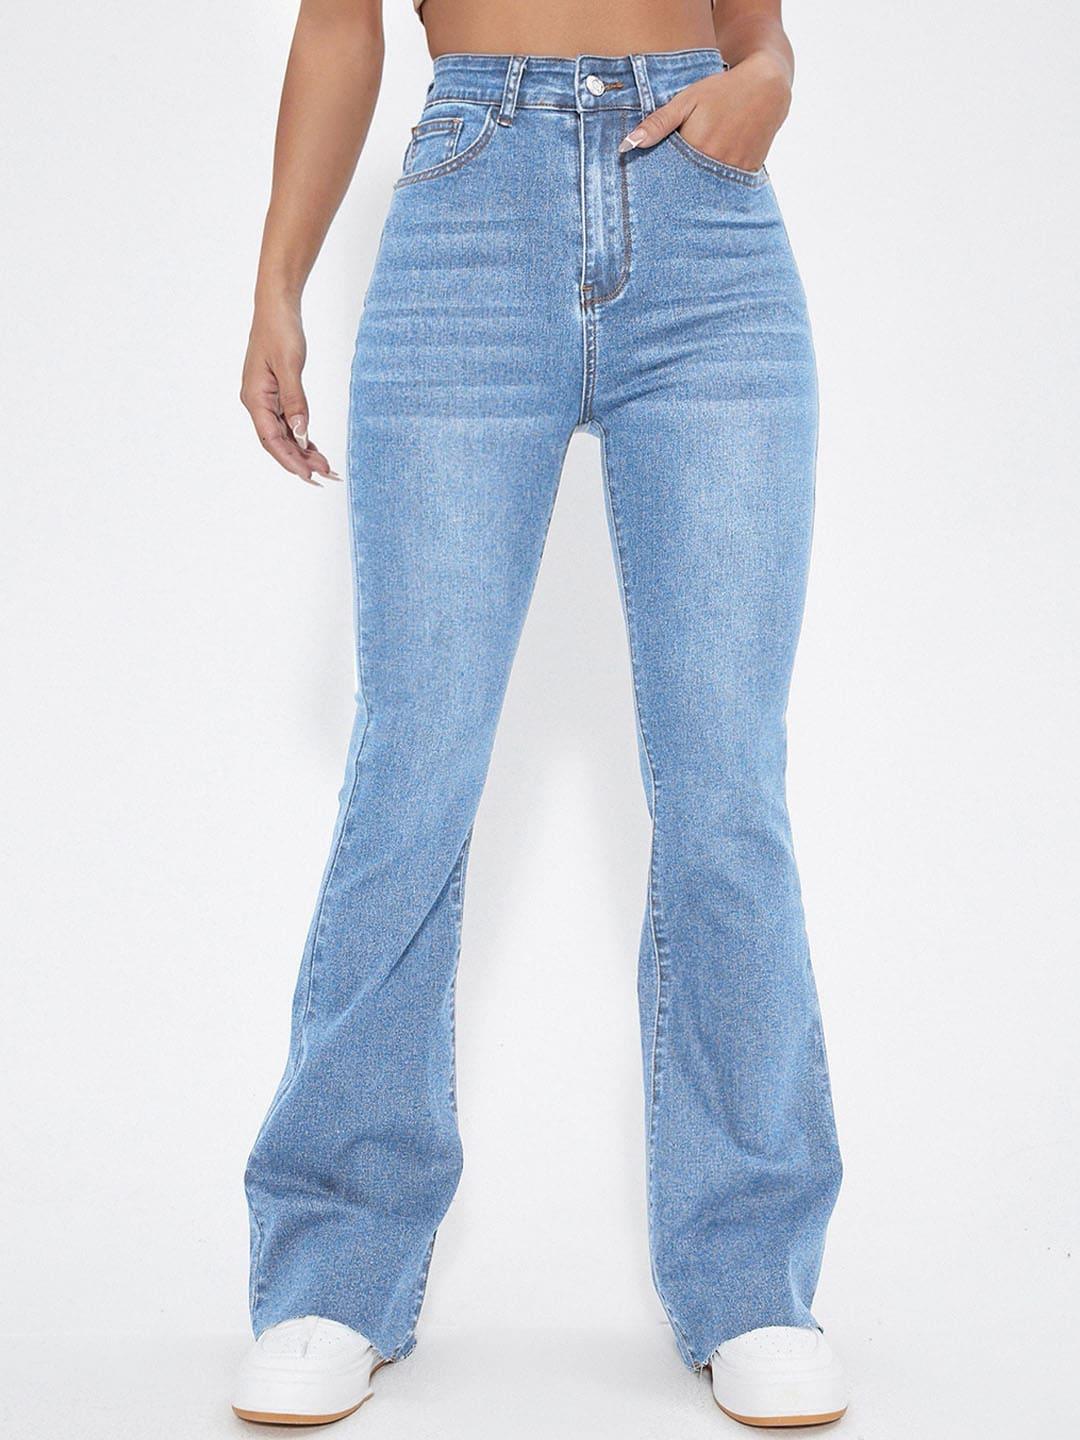 aahwan-women-high-rise-light-fade-clean-look-stretchable-denim-flared-jeans